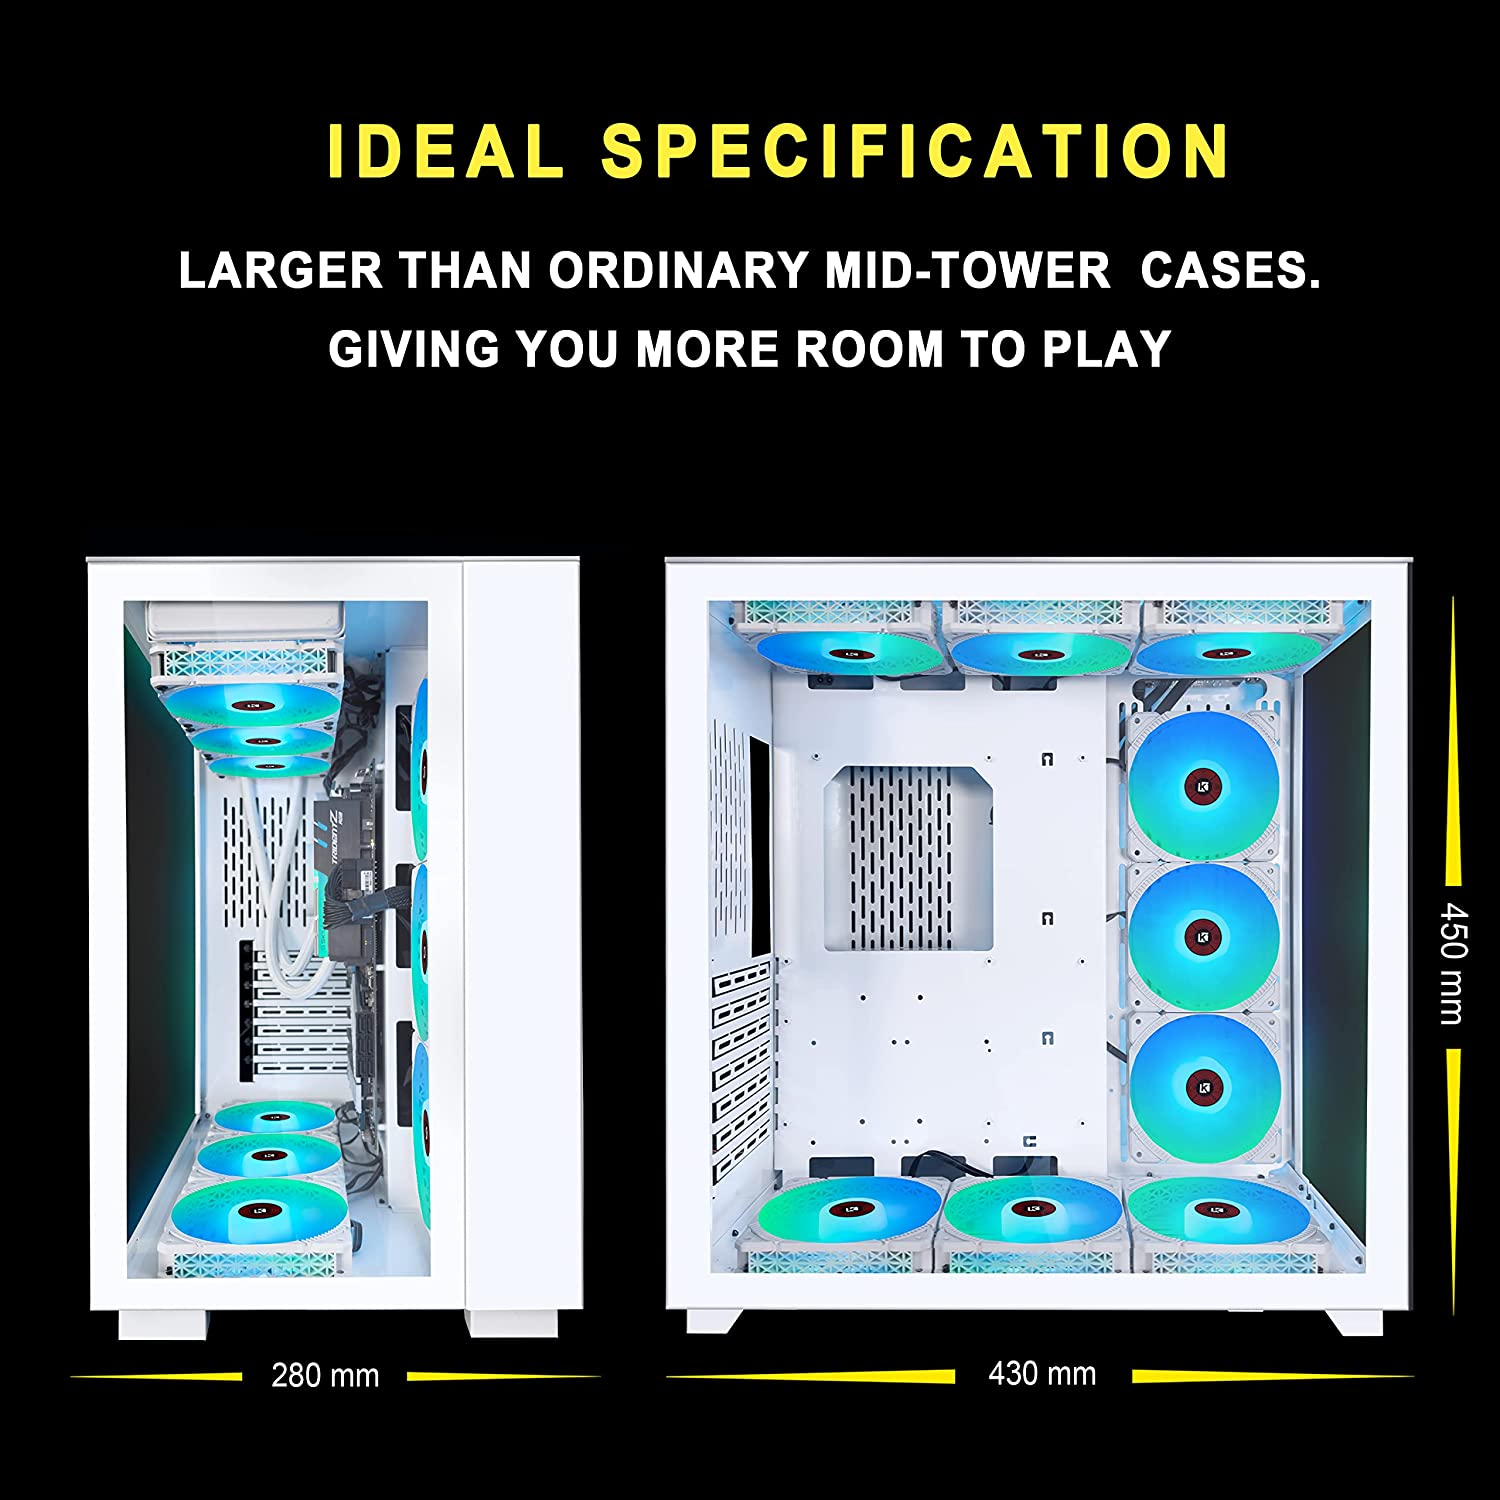  KEDIERS PC Case - ATX Mid Tower Tempered Glass Gaming